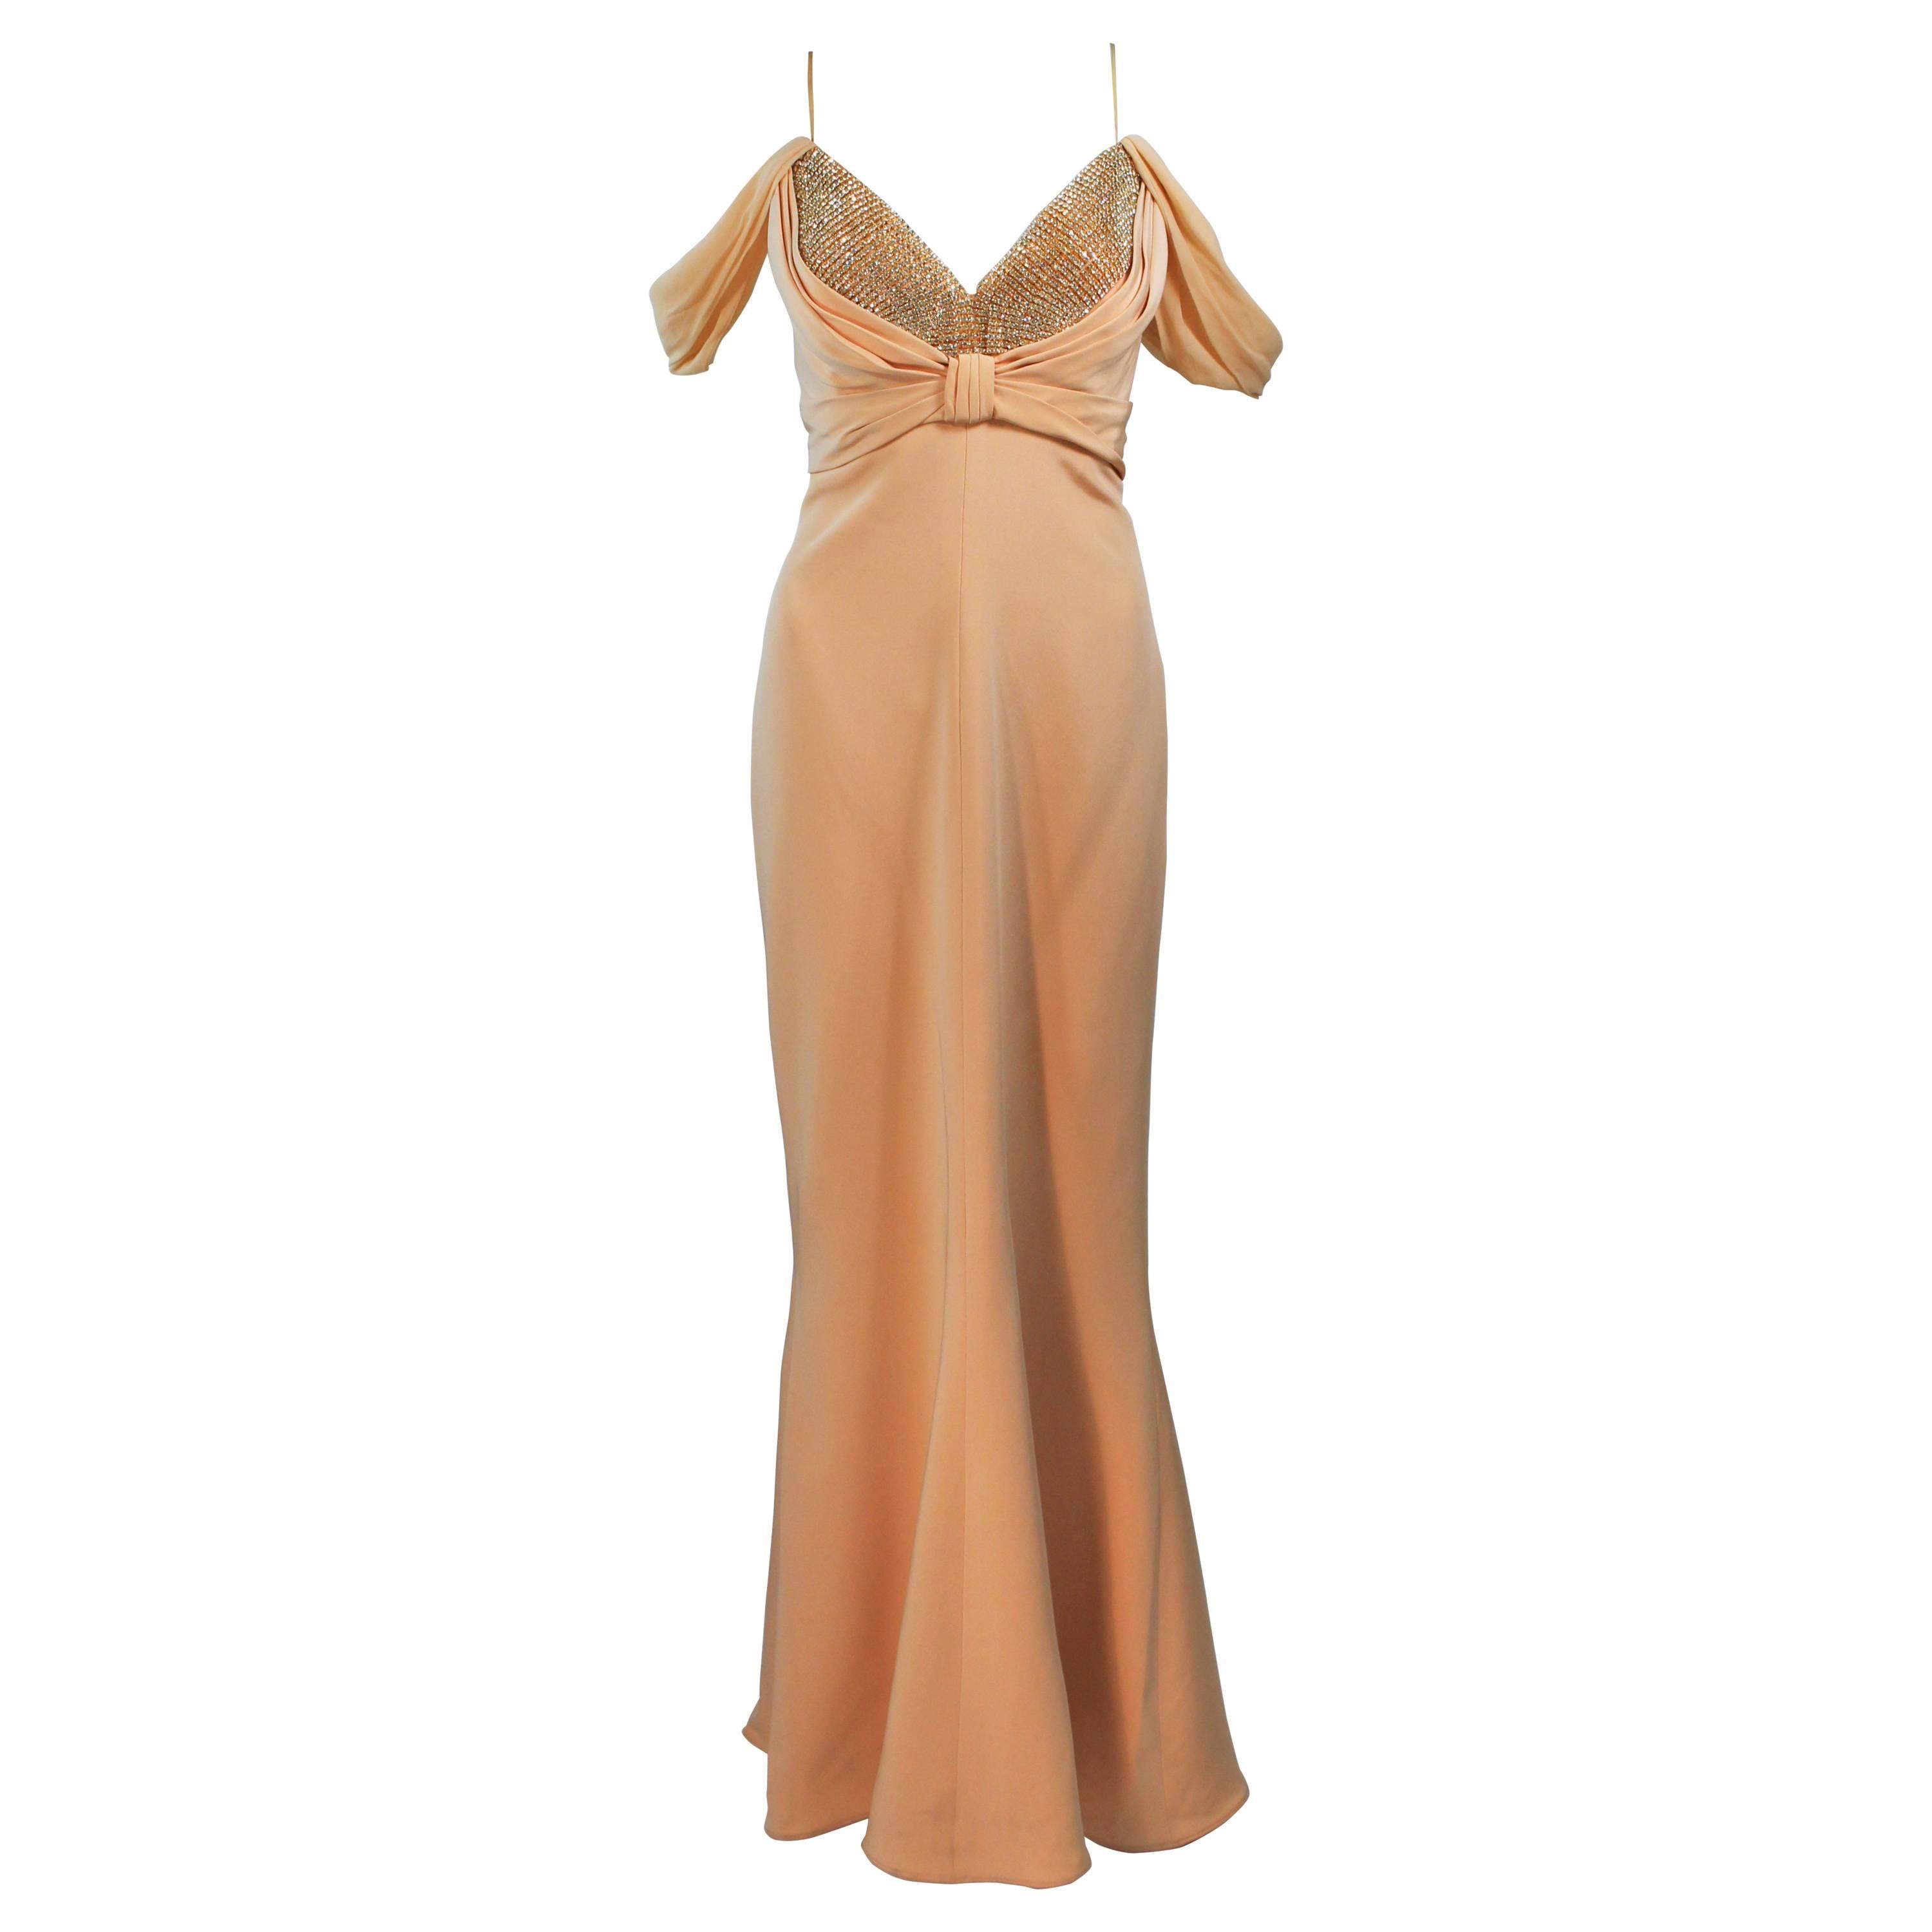 SAM CARLIN Nude Draped Off-Shoulder Gown with Rhinestone Decollete Size 10 For Sale